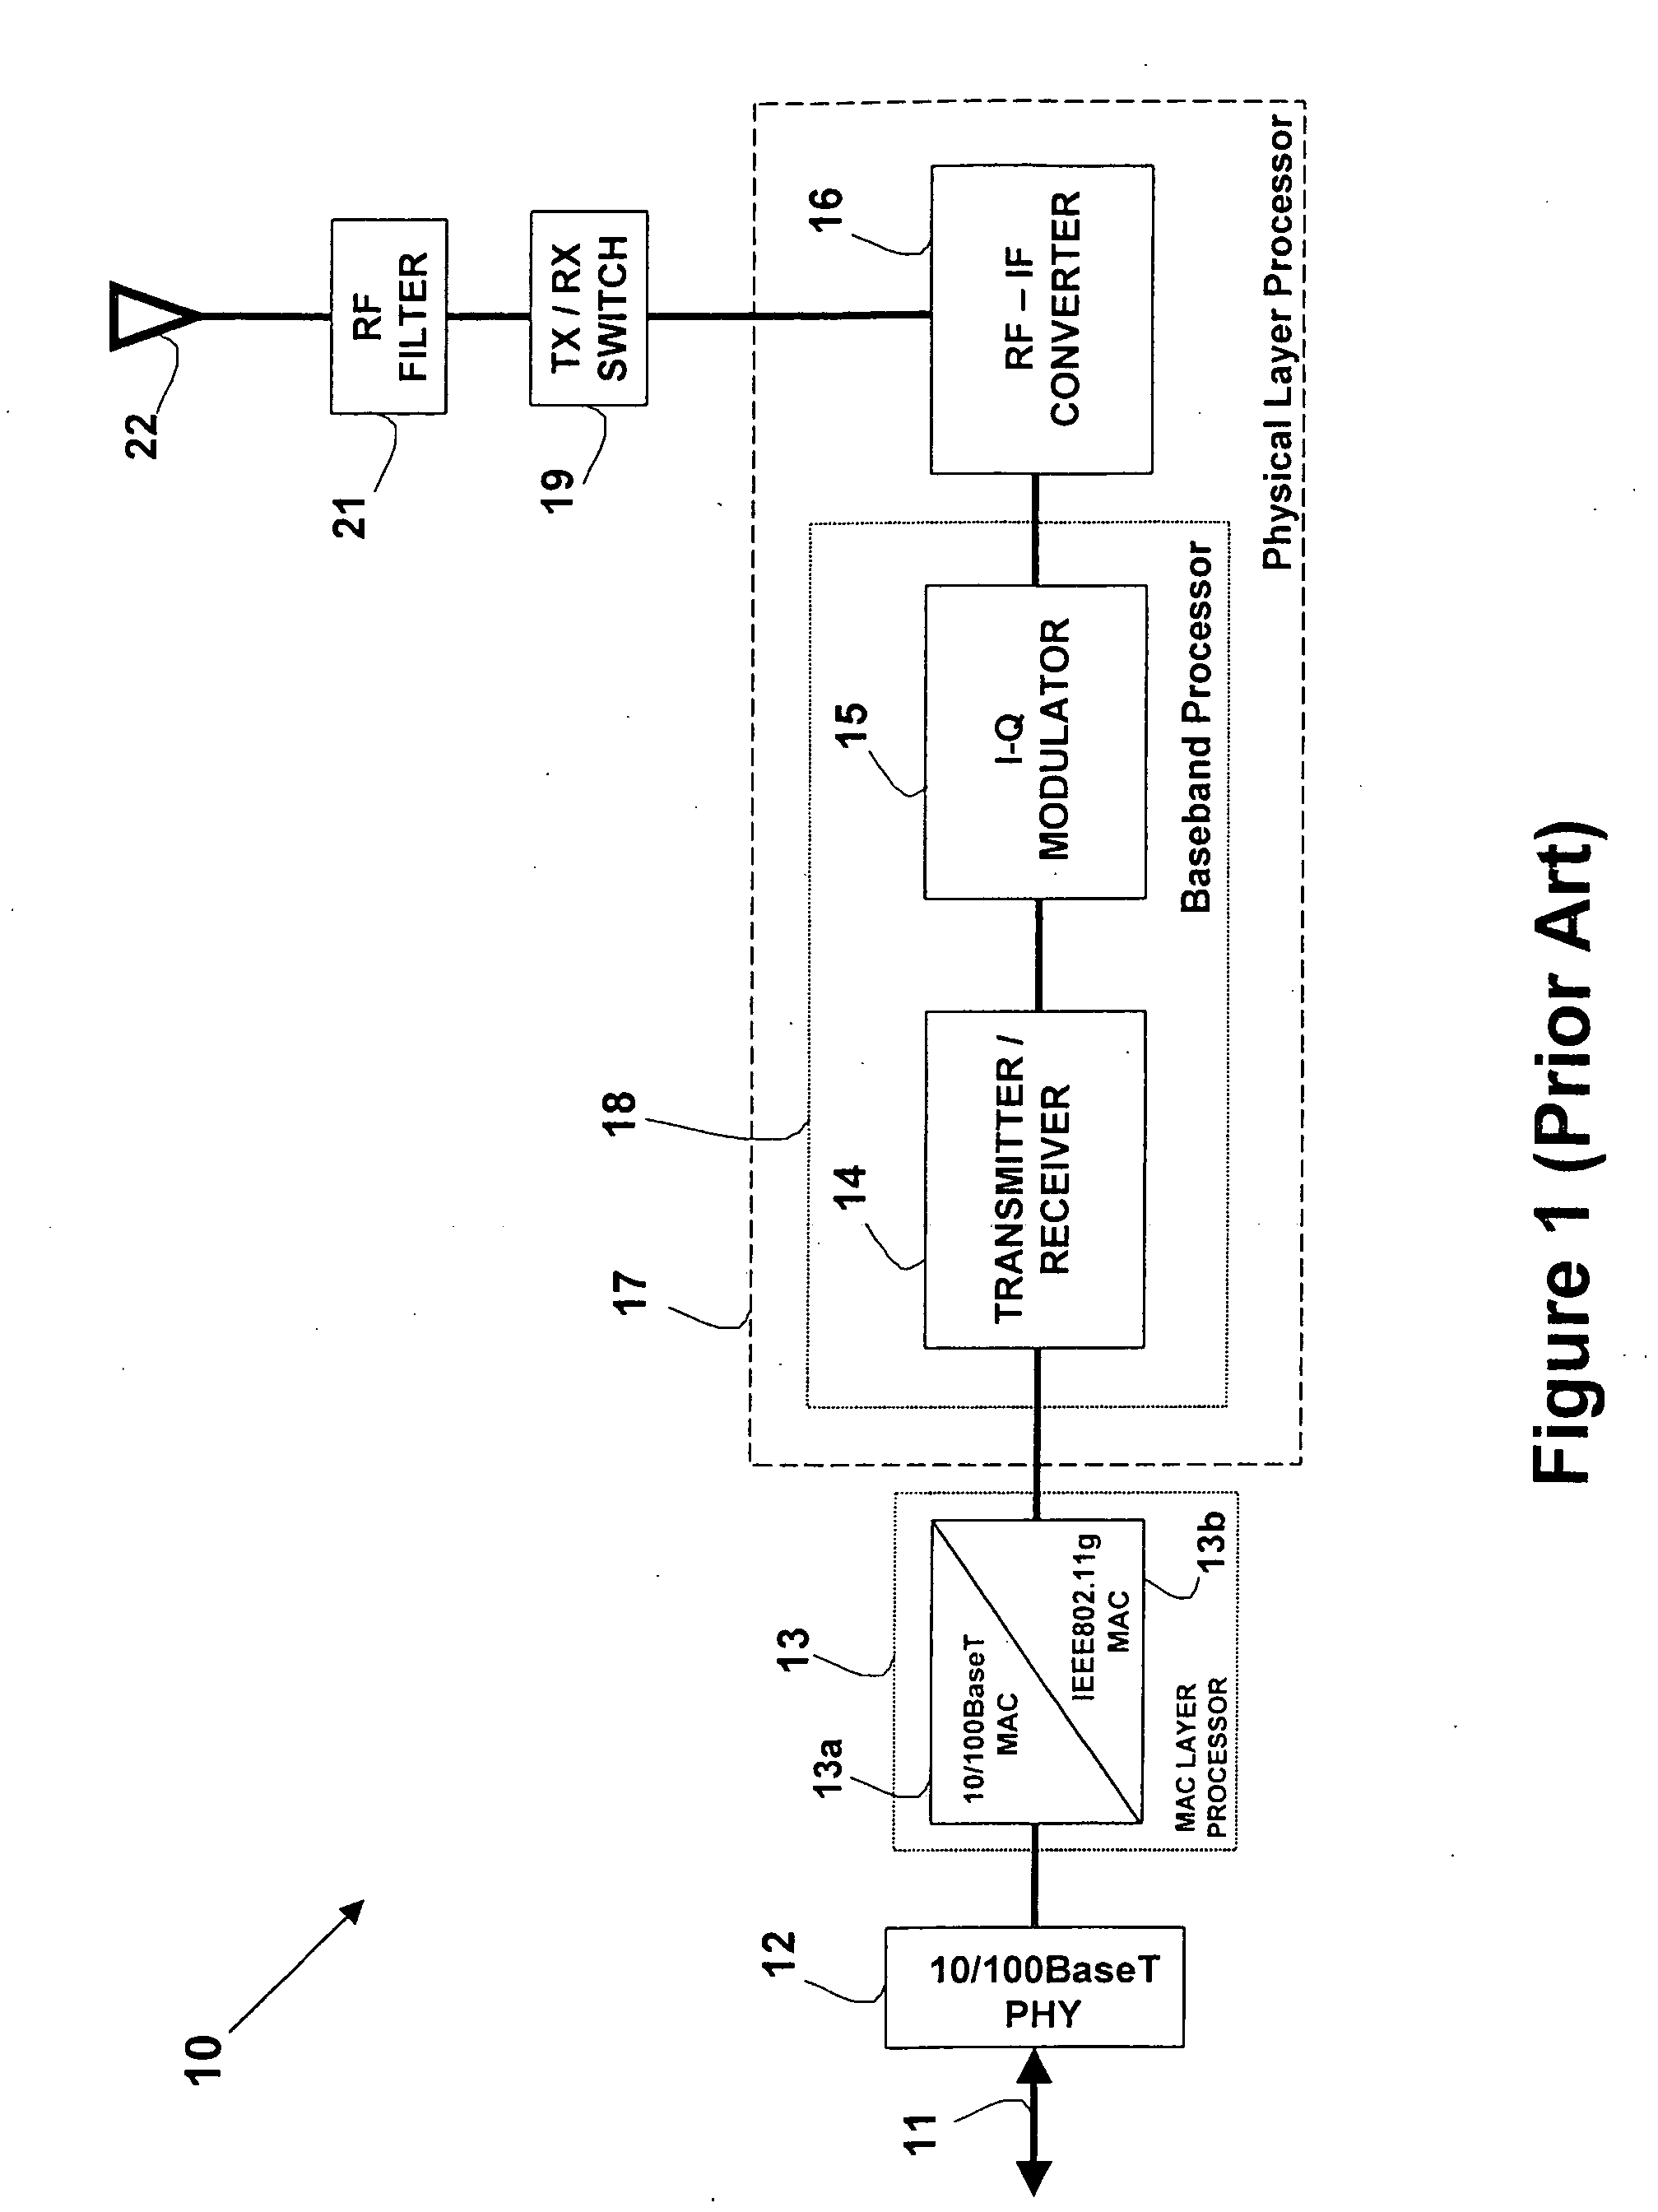 System and Method for Carrying a Wireless Based Signal Over Wiring